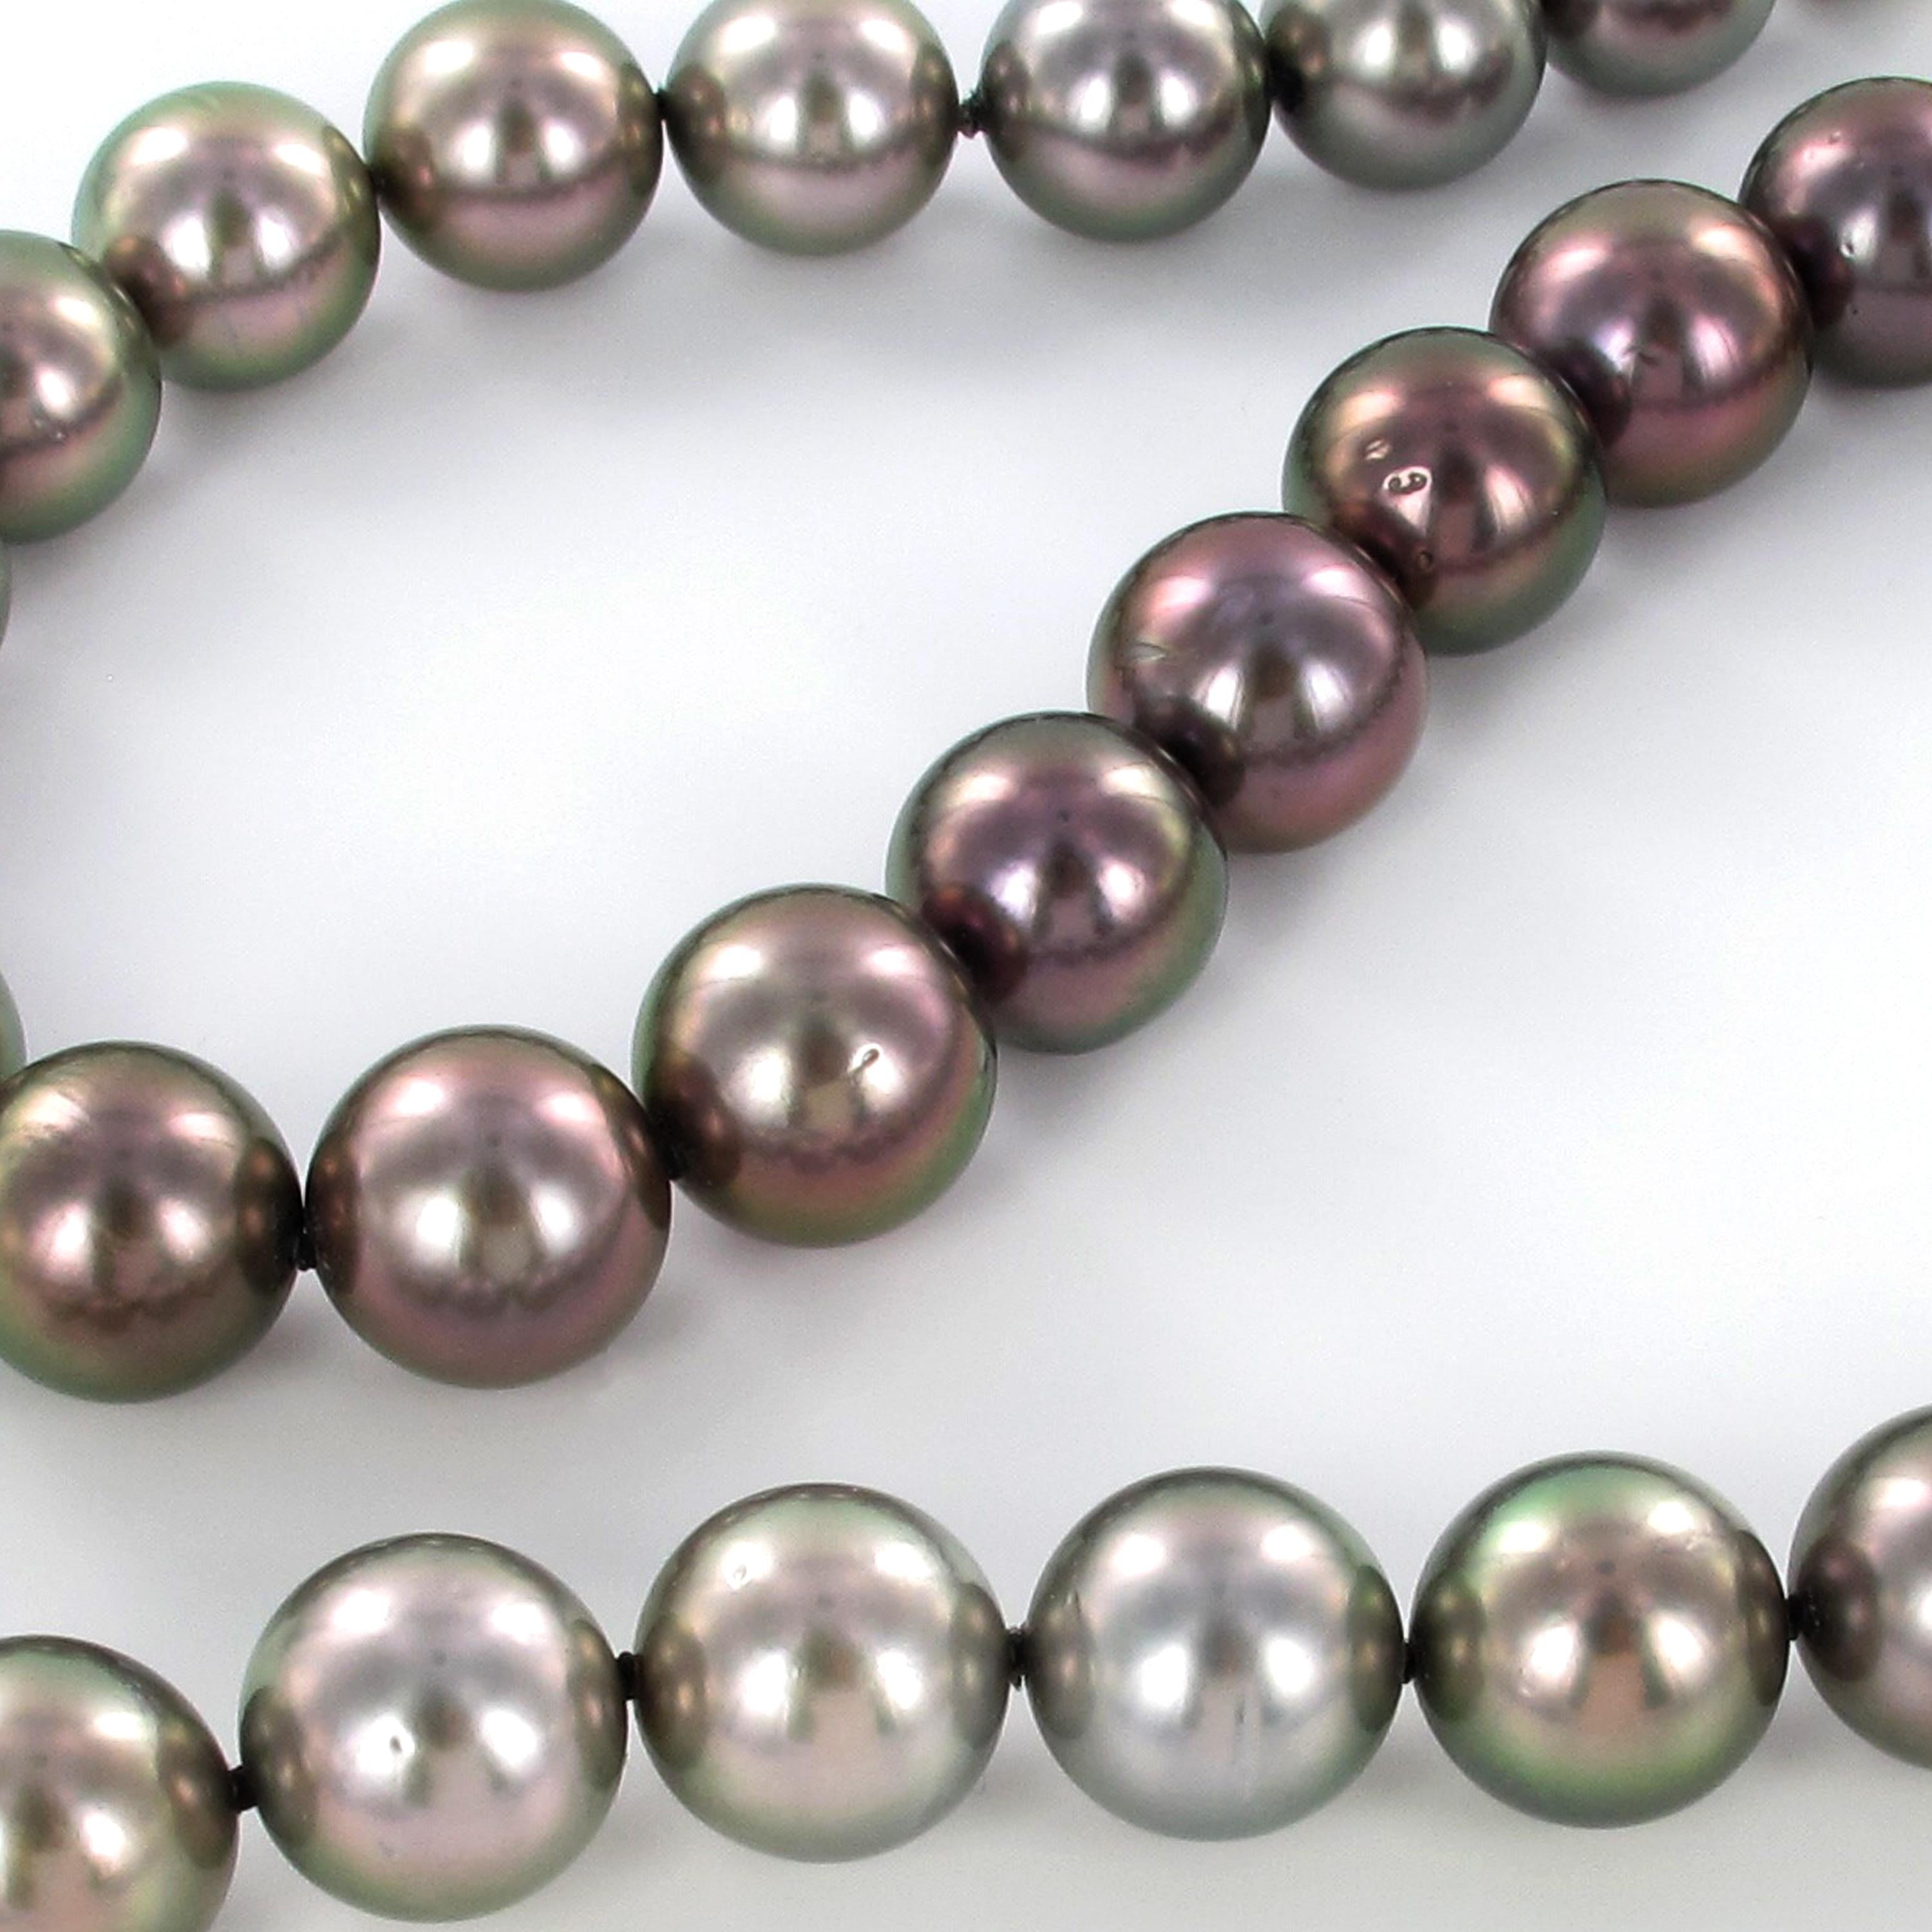 Multicolored Tahitian Cultured Pearl and Diamond Necklace In Excellent Condition For Sale In Lucerne, CH